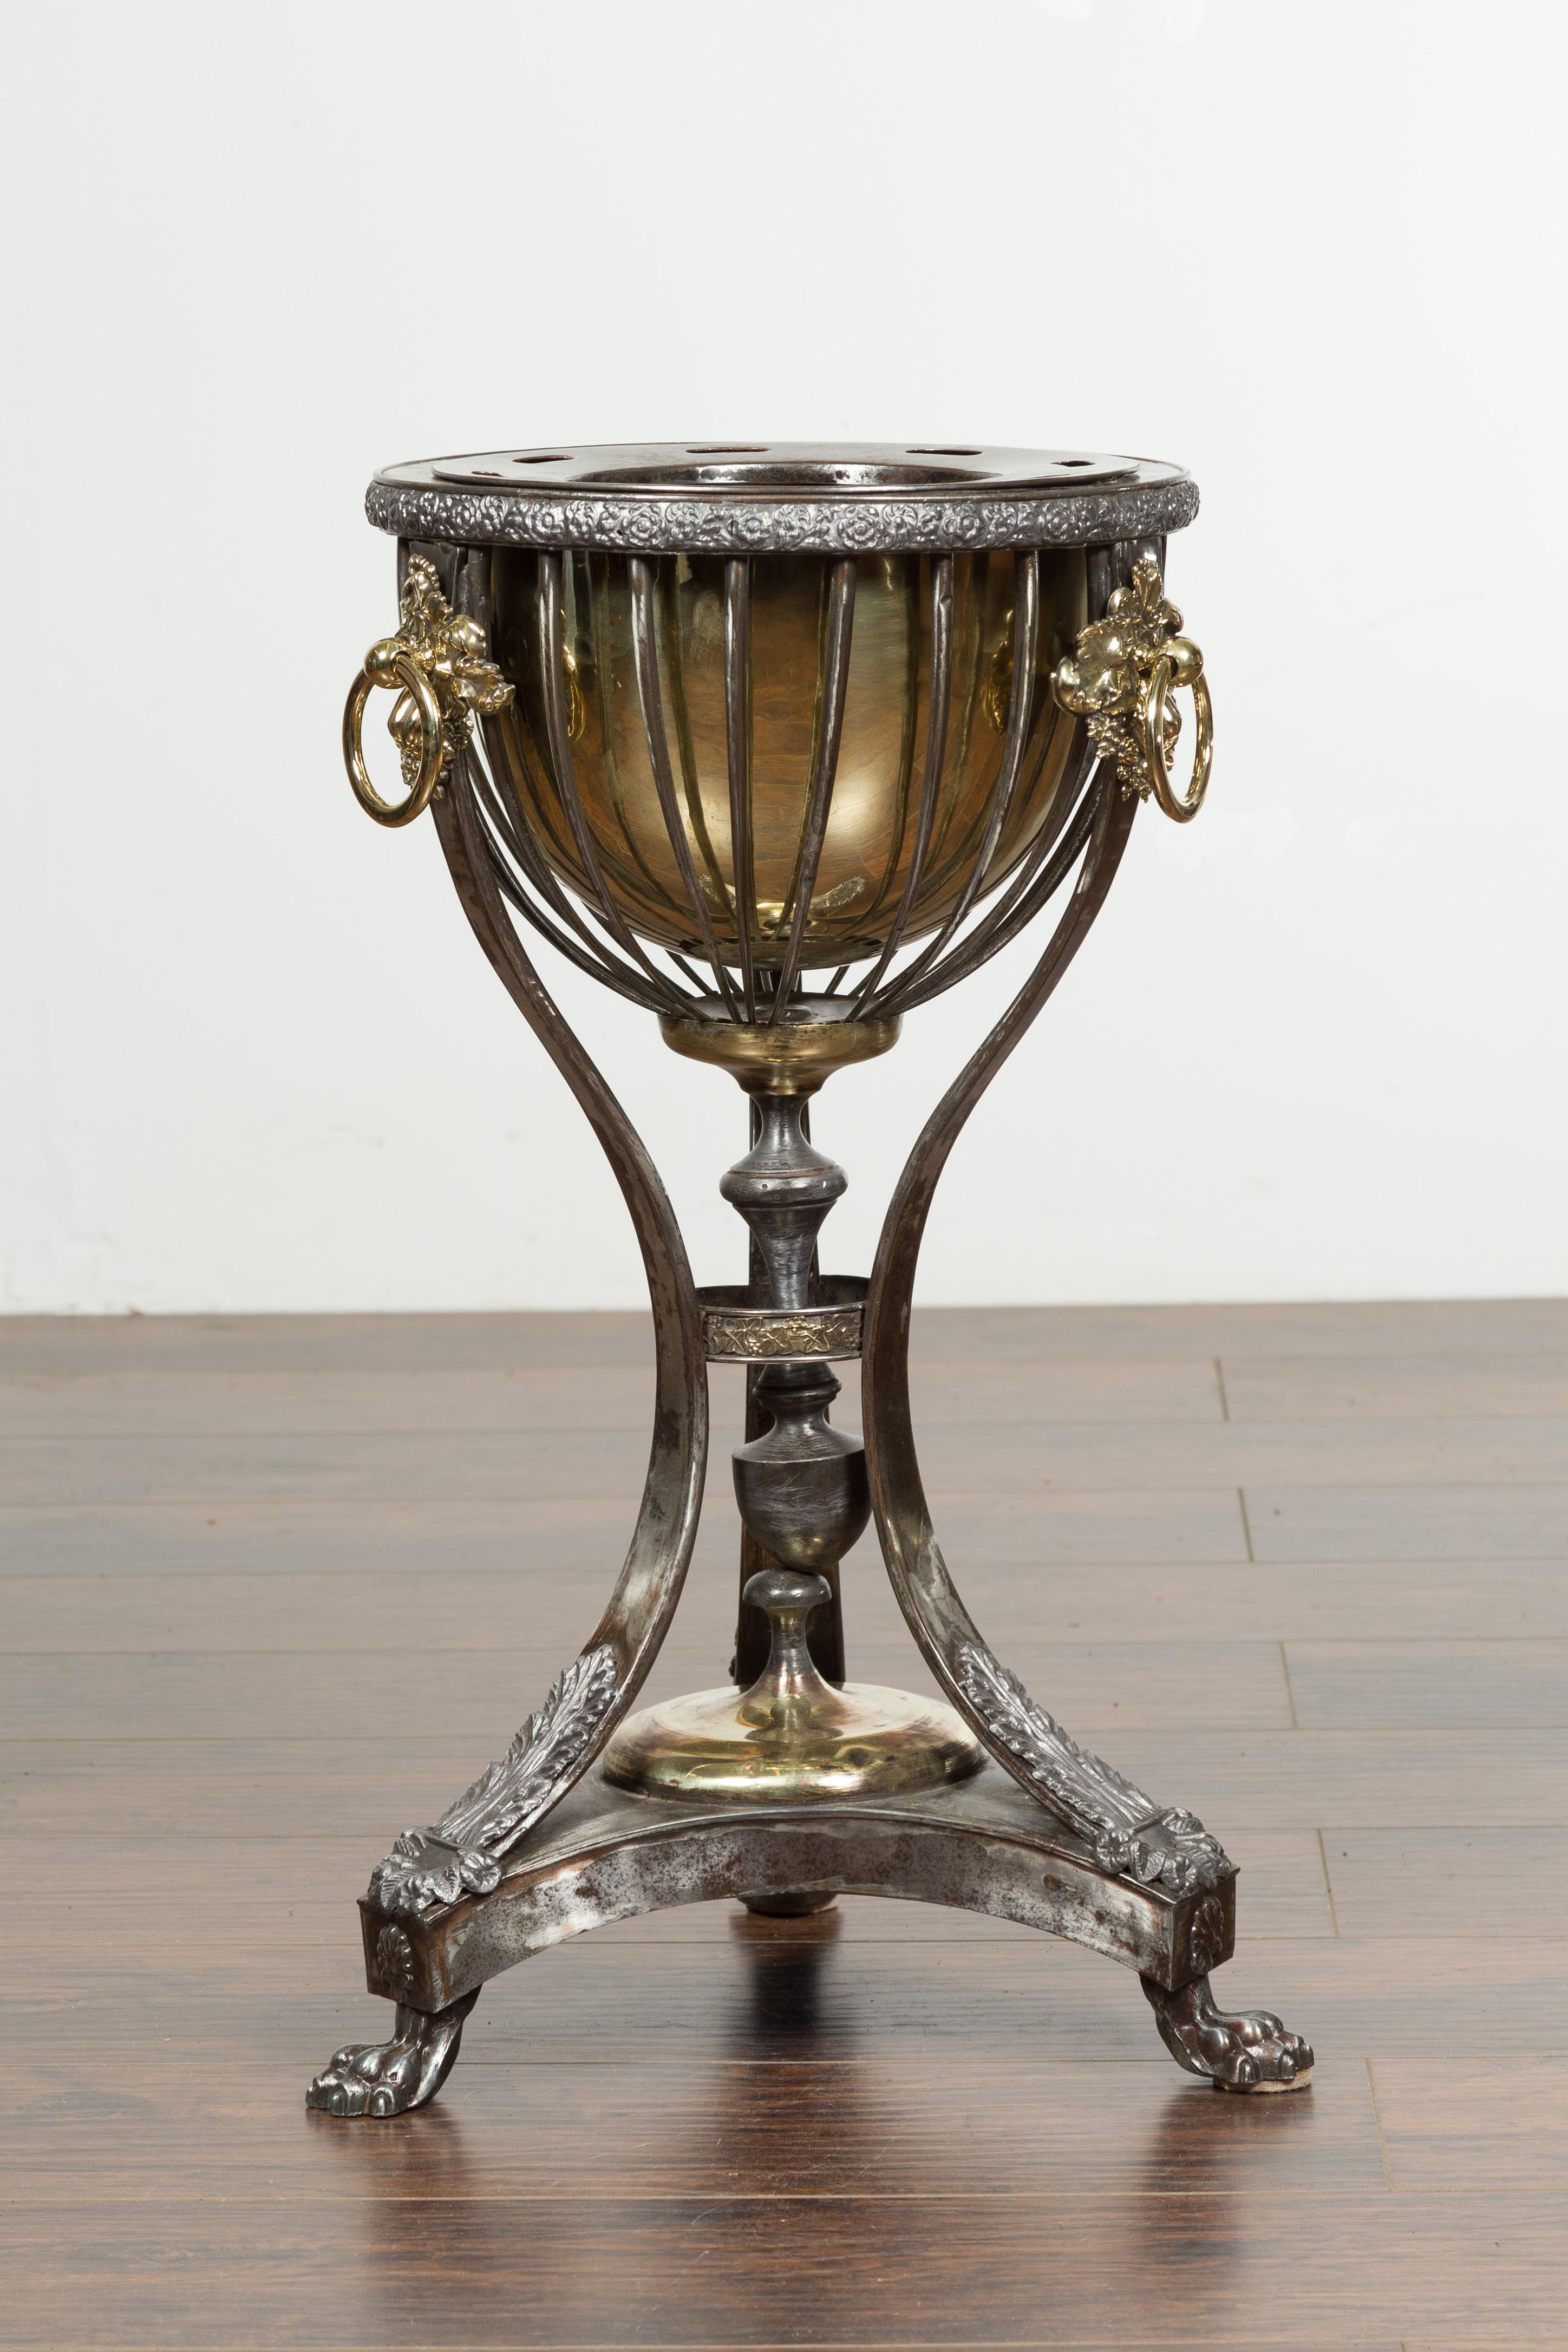 English 1820s Steel and Brass Tripod Wine Cooler with Foliage and Fruit Motifs For Sale 4